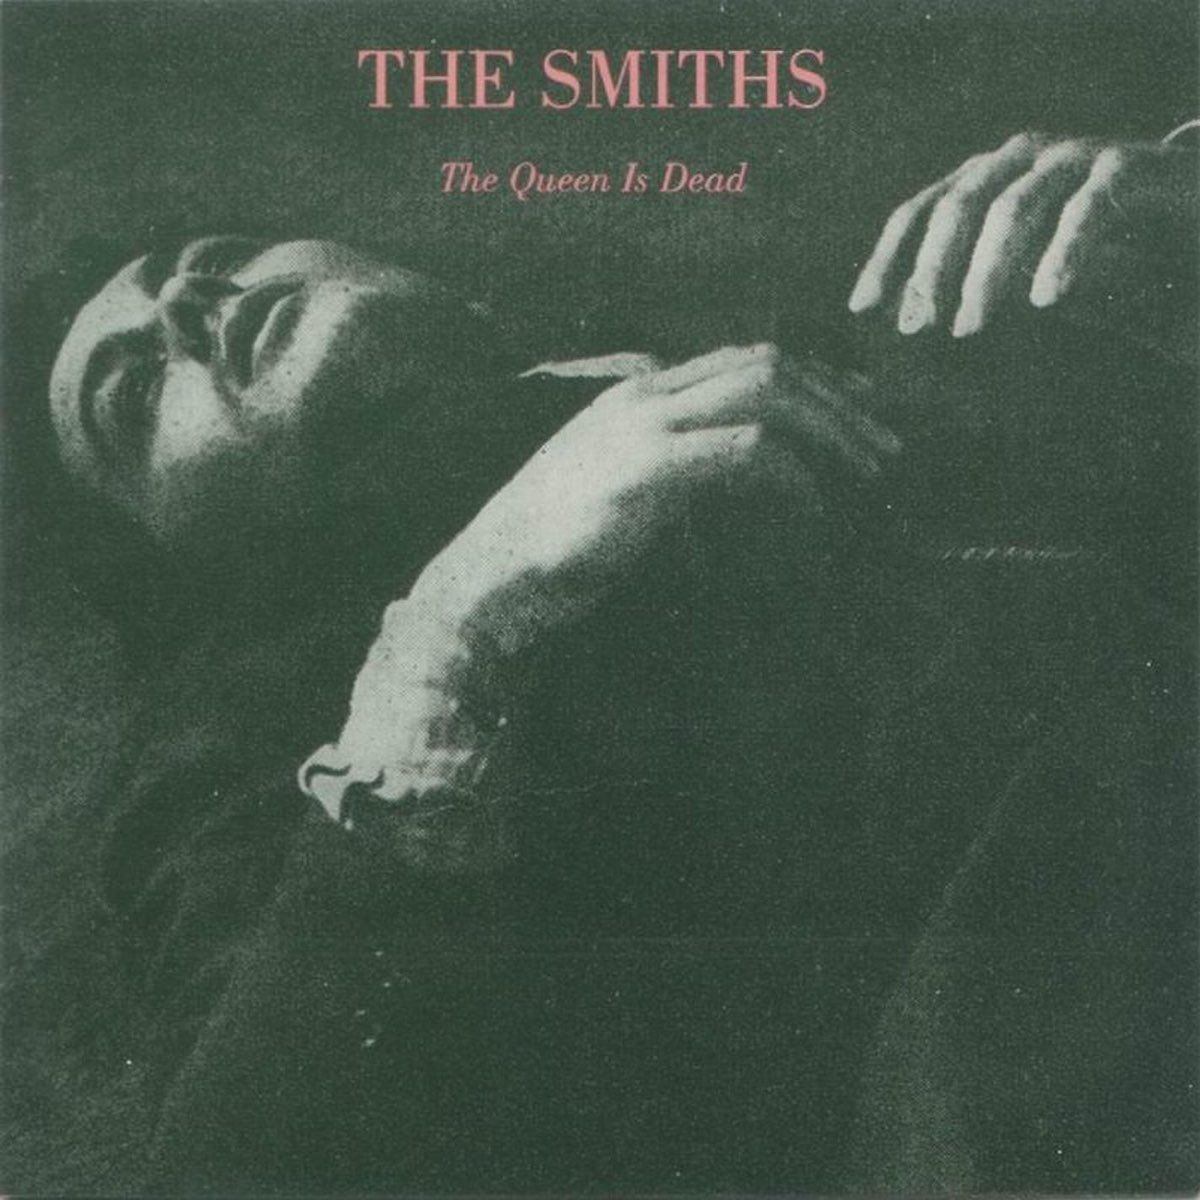 The Smiths — The Queen is Dead cover artwork